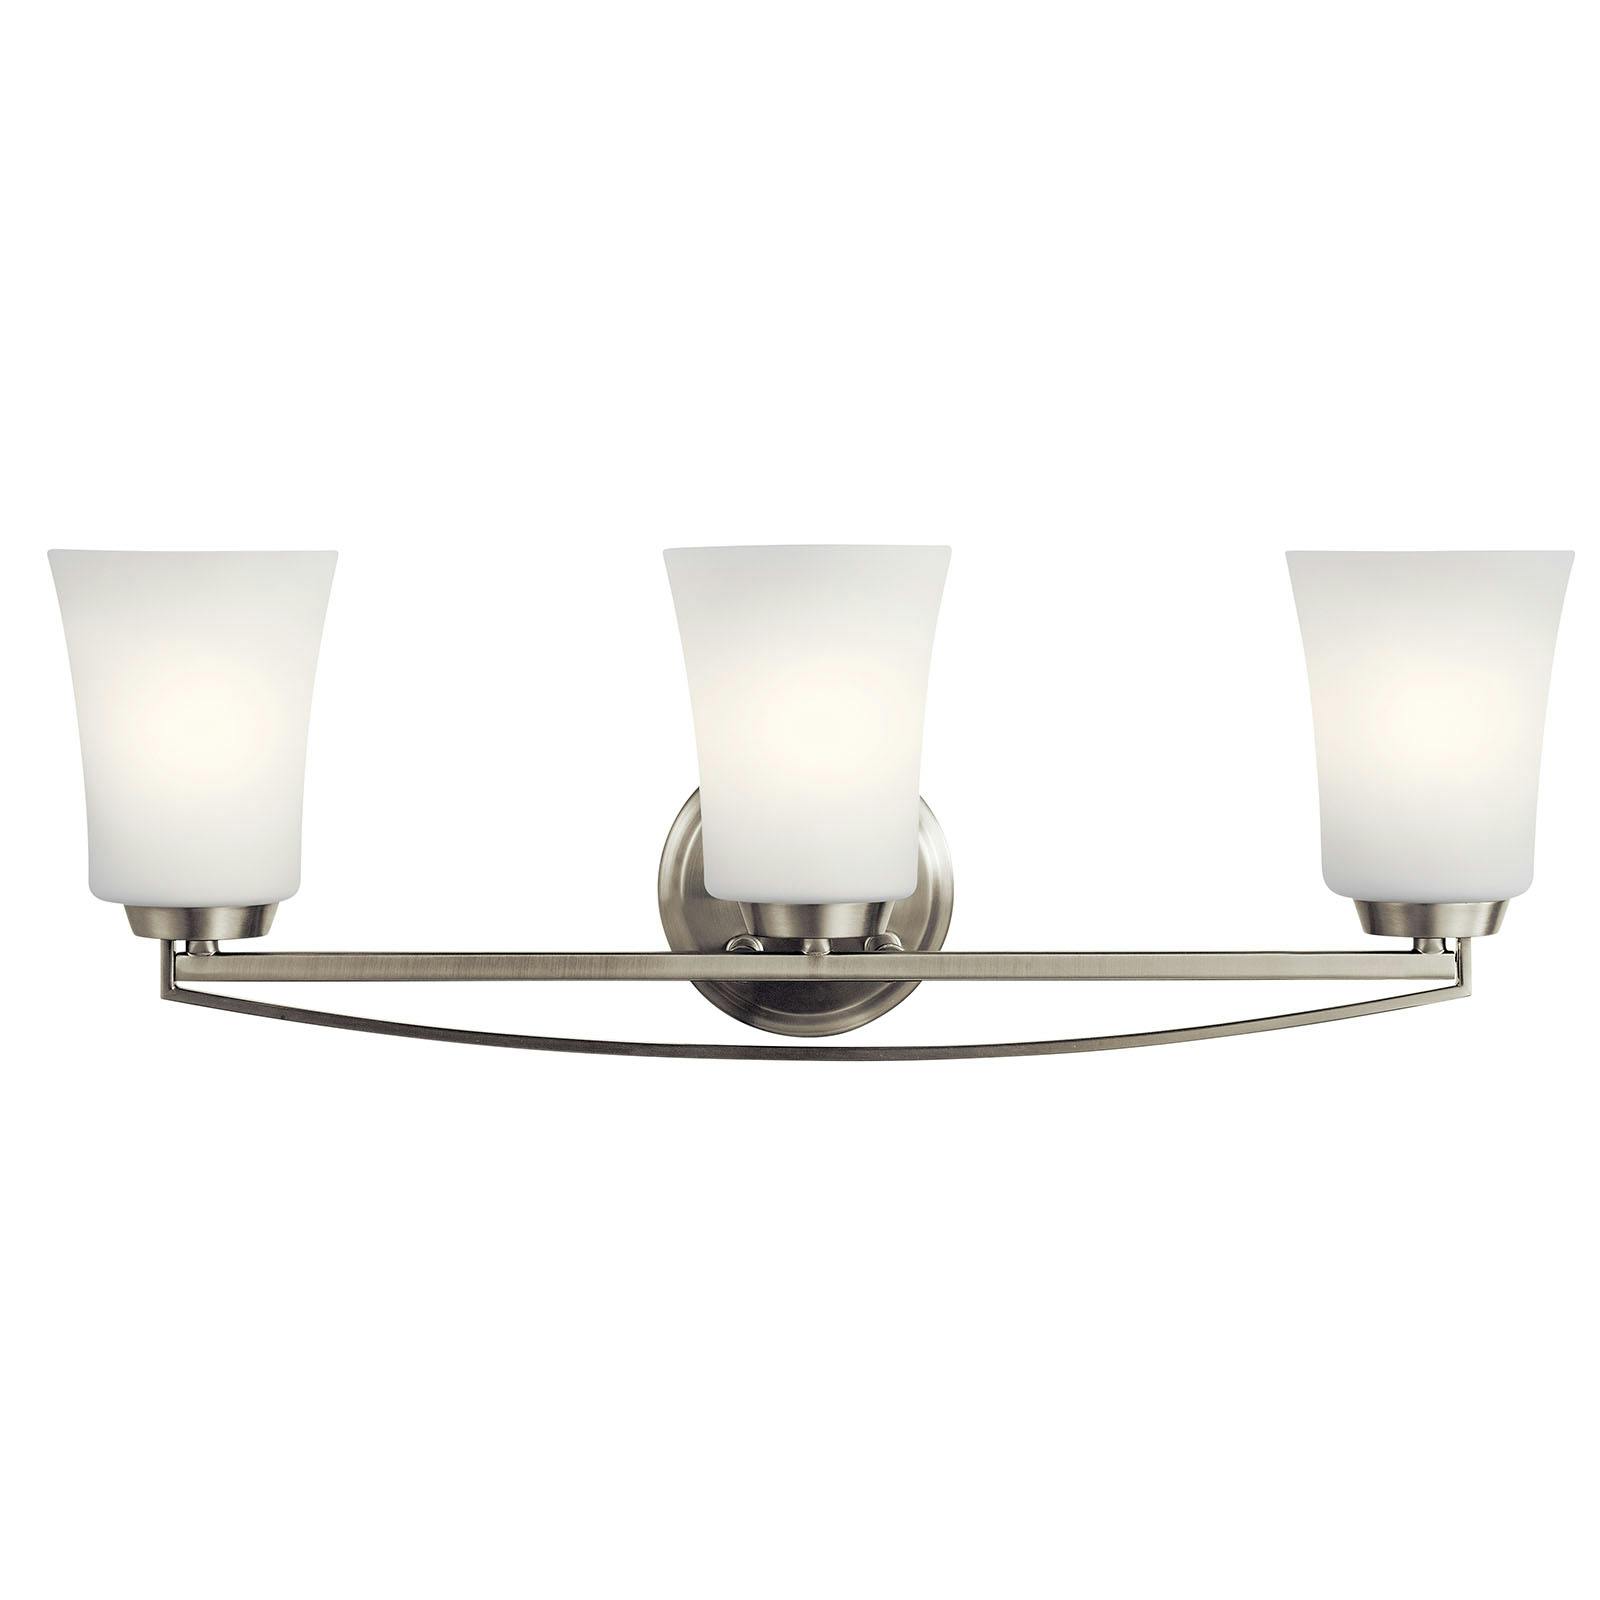 The Tao 3 Light Vanity Light Brushed Nickel facing up on a white background